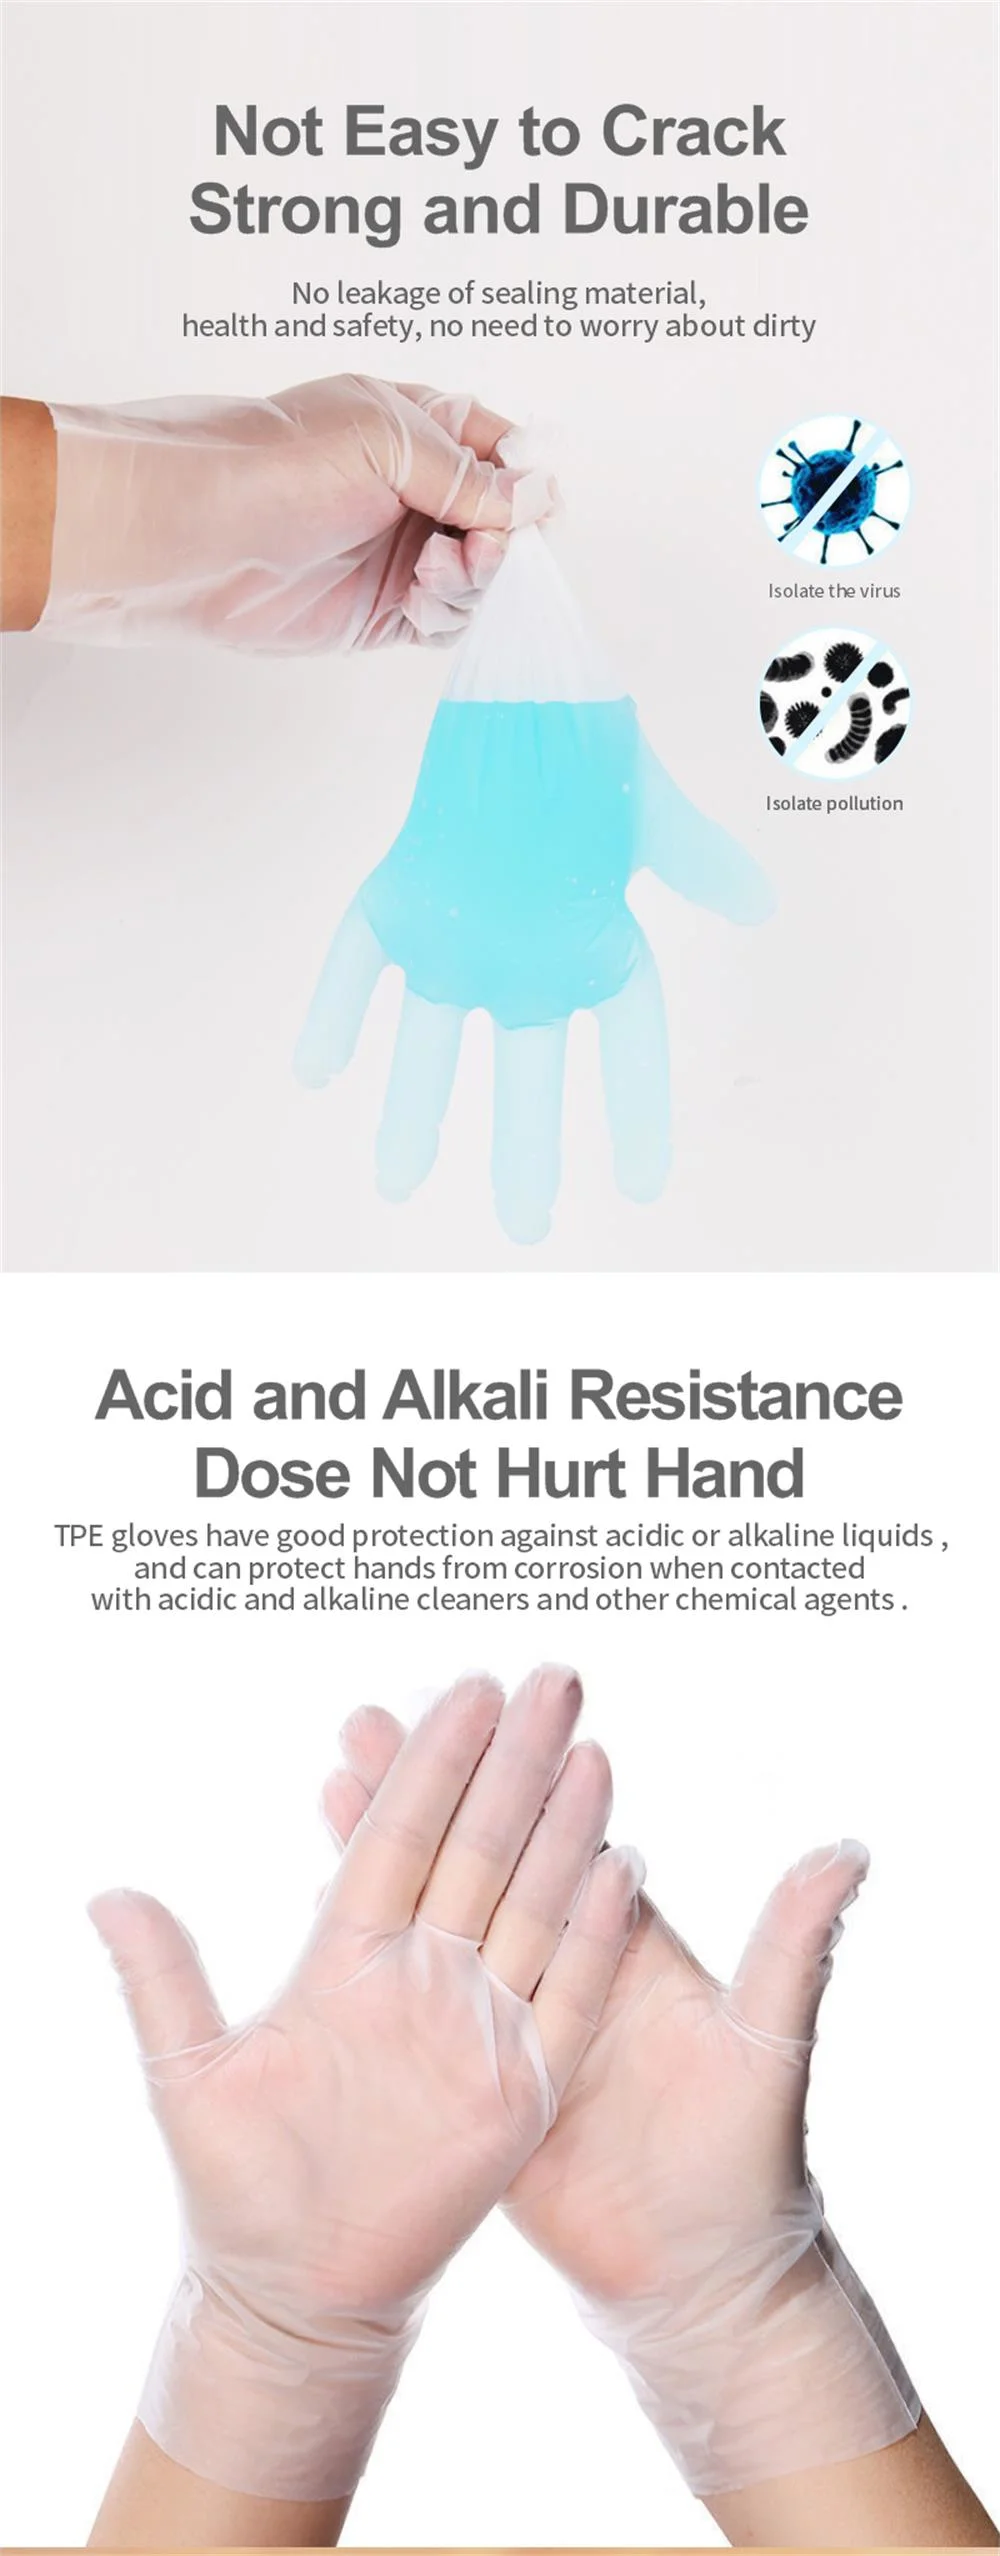 High Performance Disposable Gloves, TPE CPE Food Service Gloves, Waterproof Liquid-Proof Latex Free